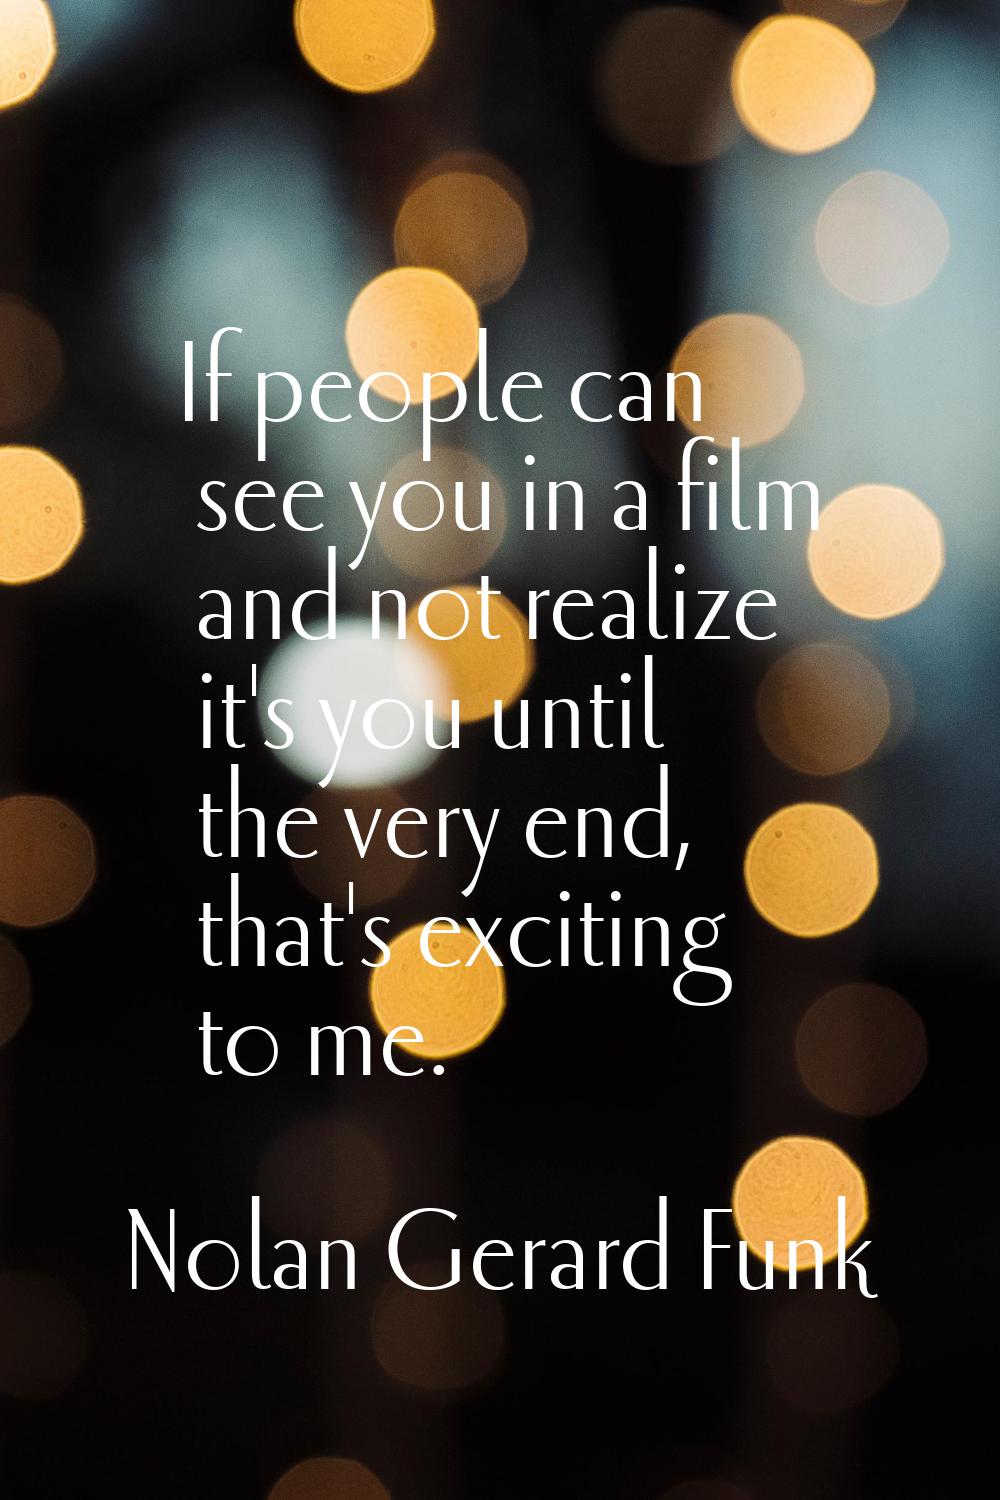 If people can see you in a film and not realize it's you until the very end, that's exciting to me.